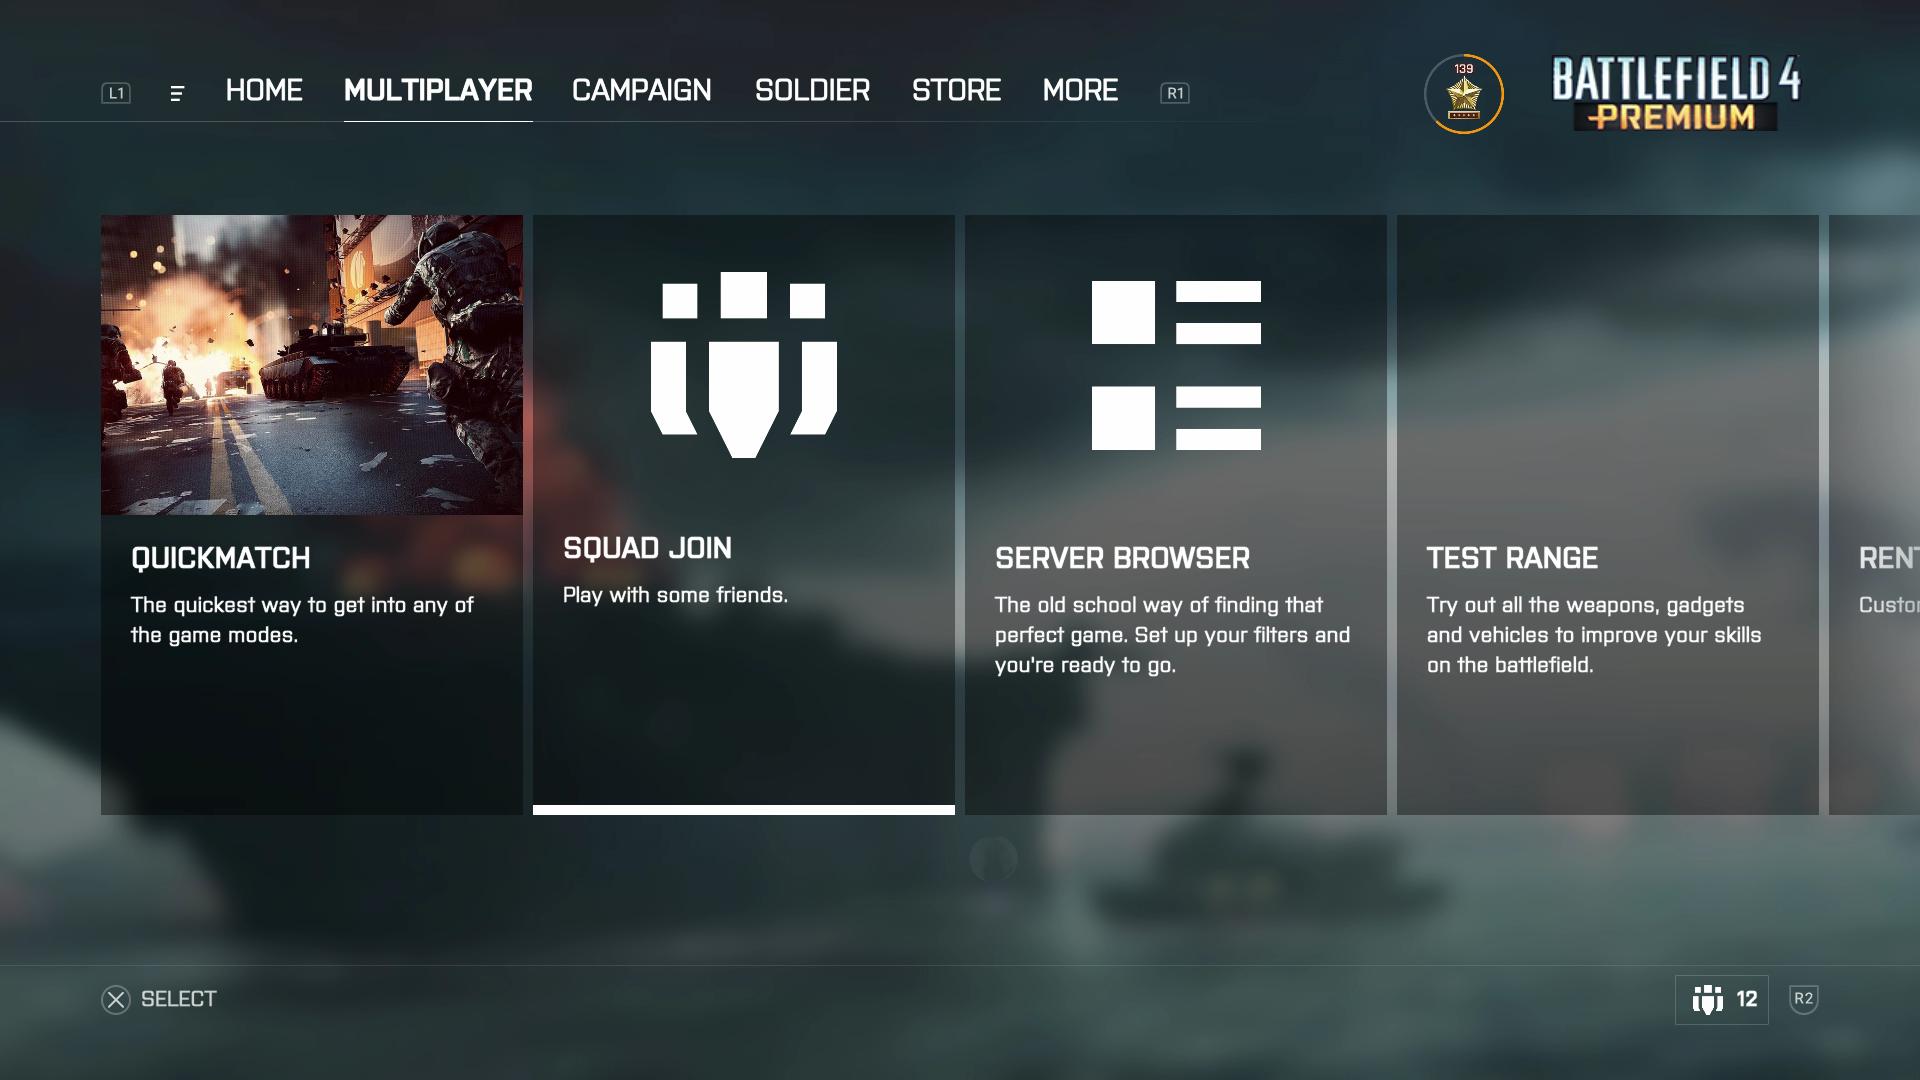 Image for Battlefield 4 gets new, cleaner UI on PS4 and Xbox One